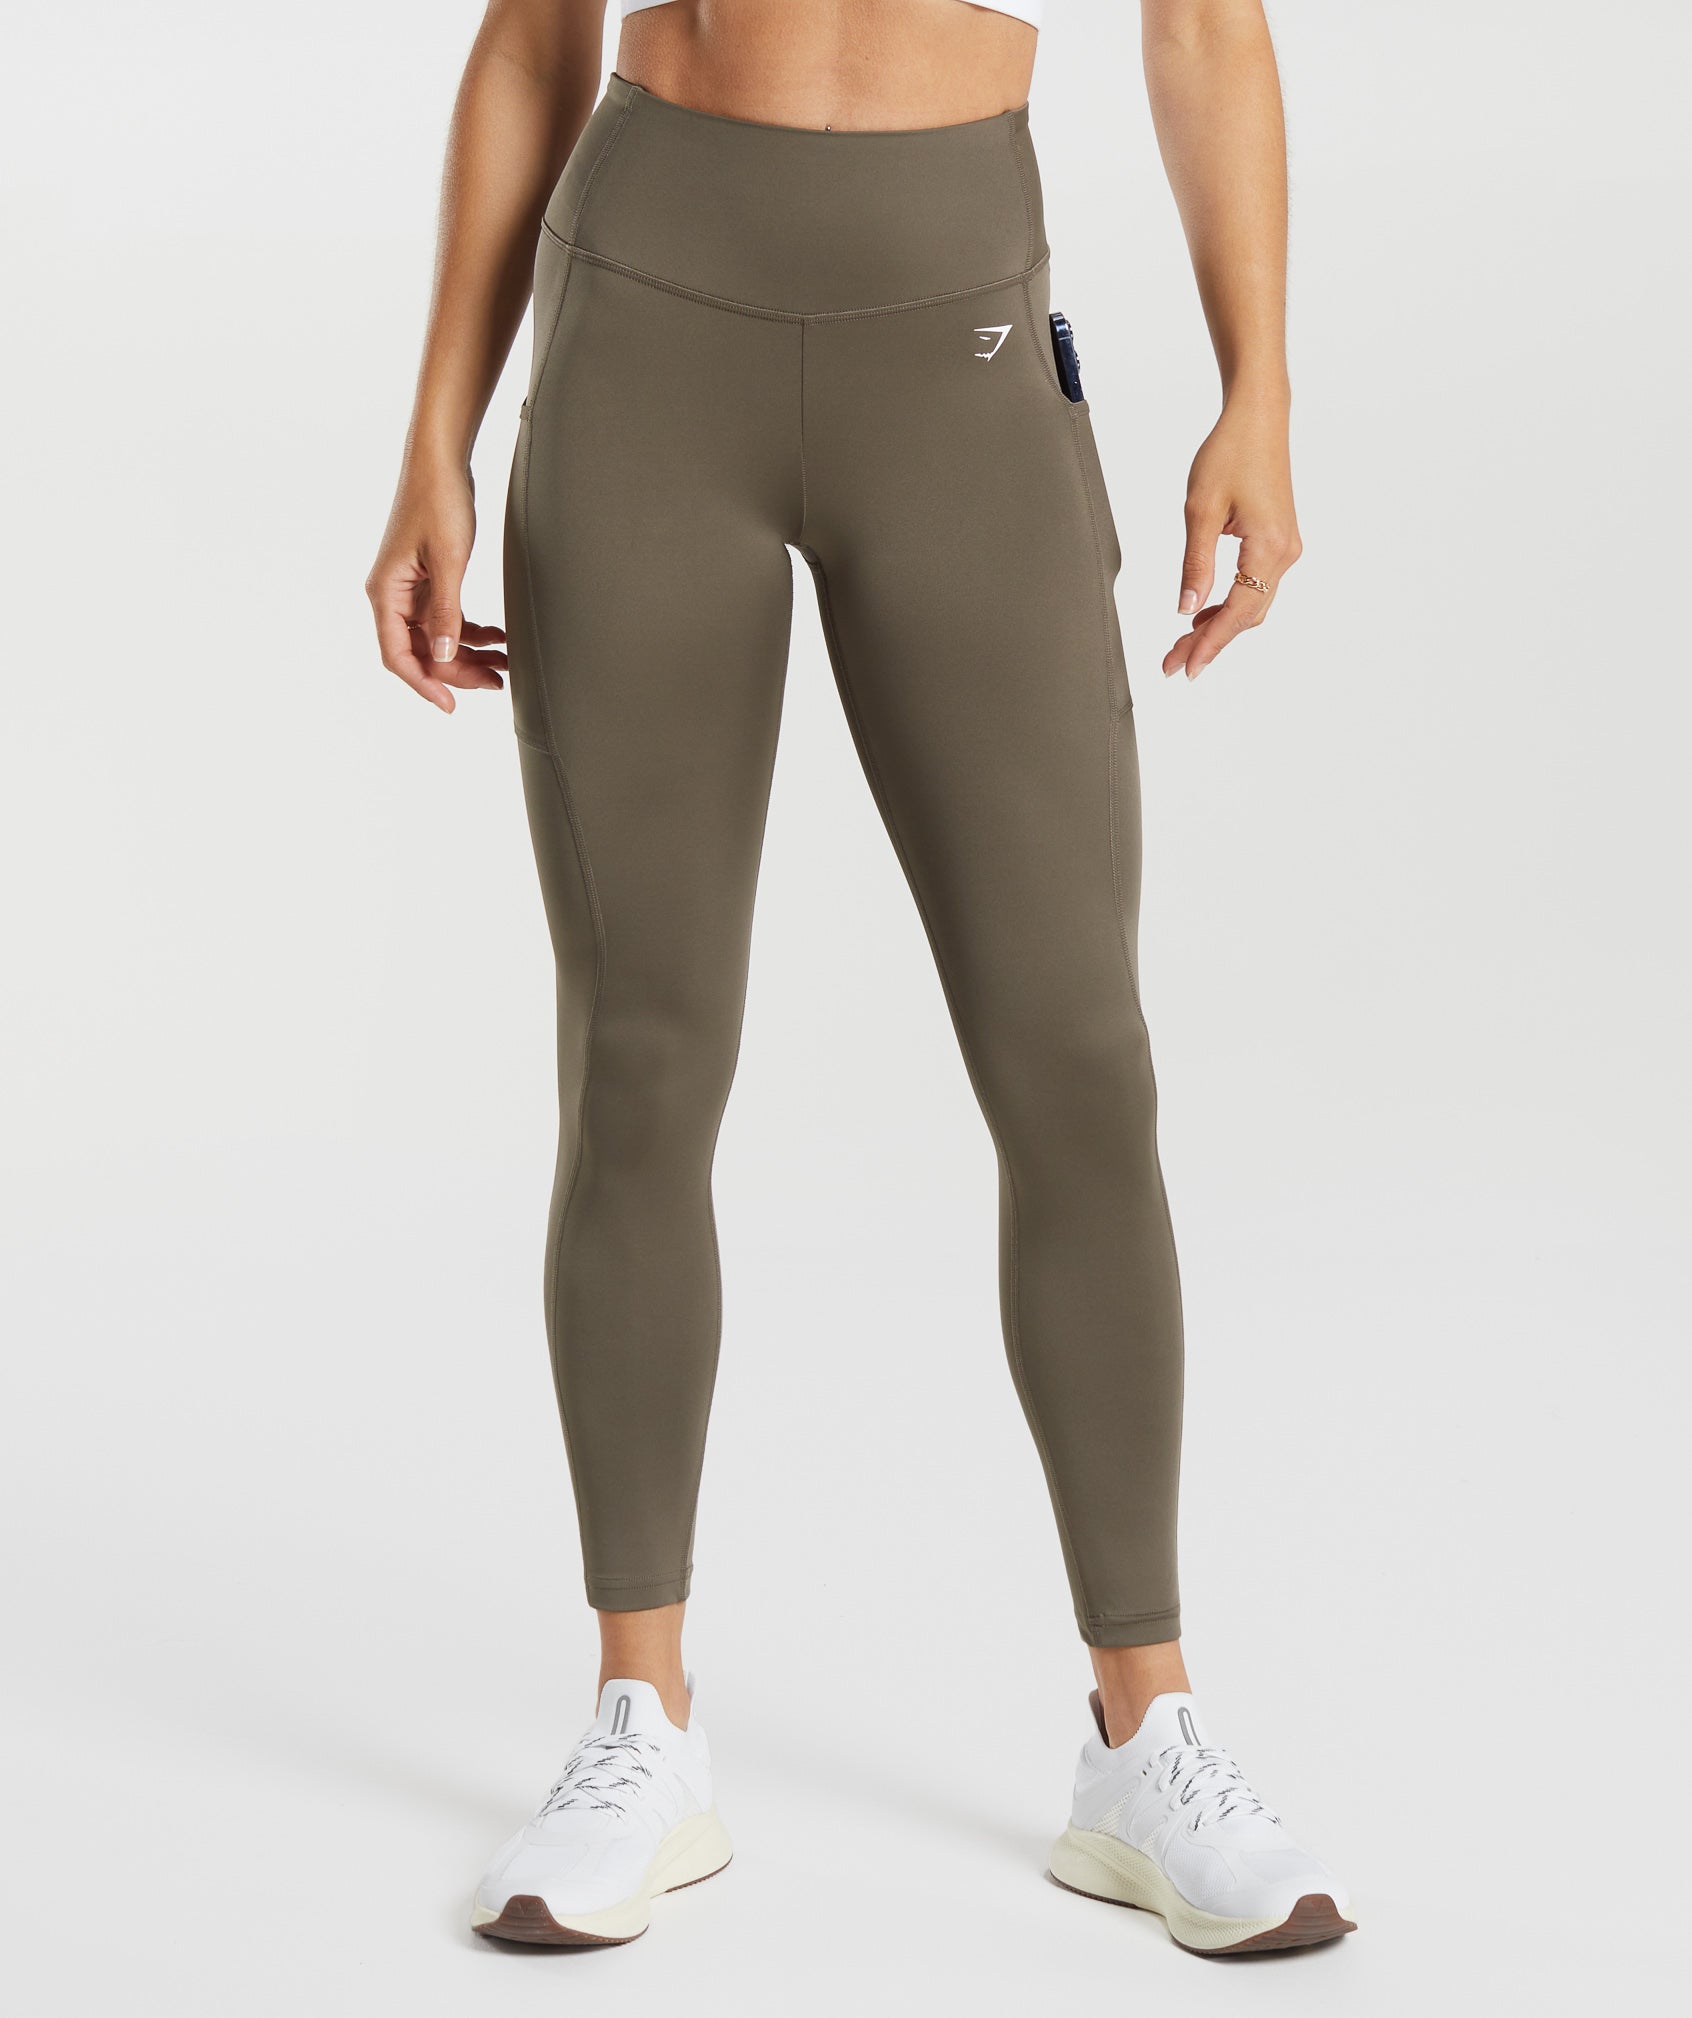 Brown Colour Leggings  Find Your Perfect Match